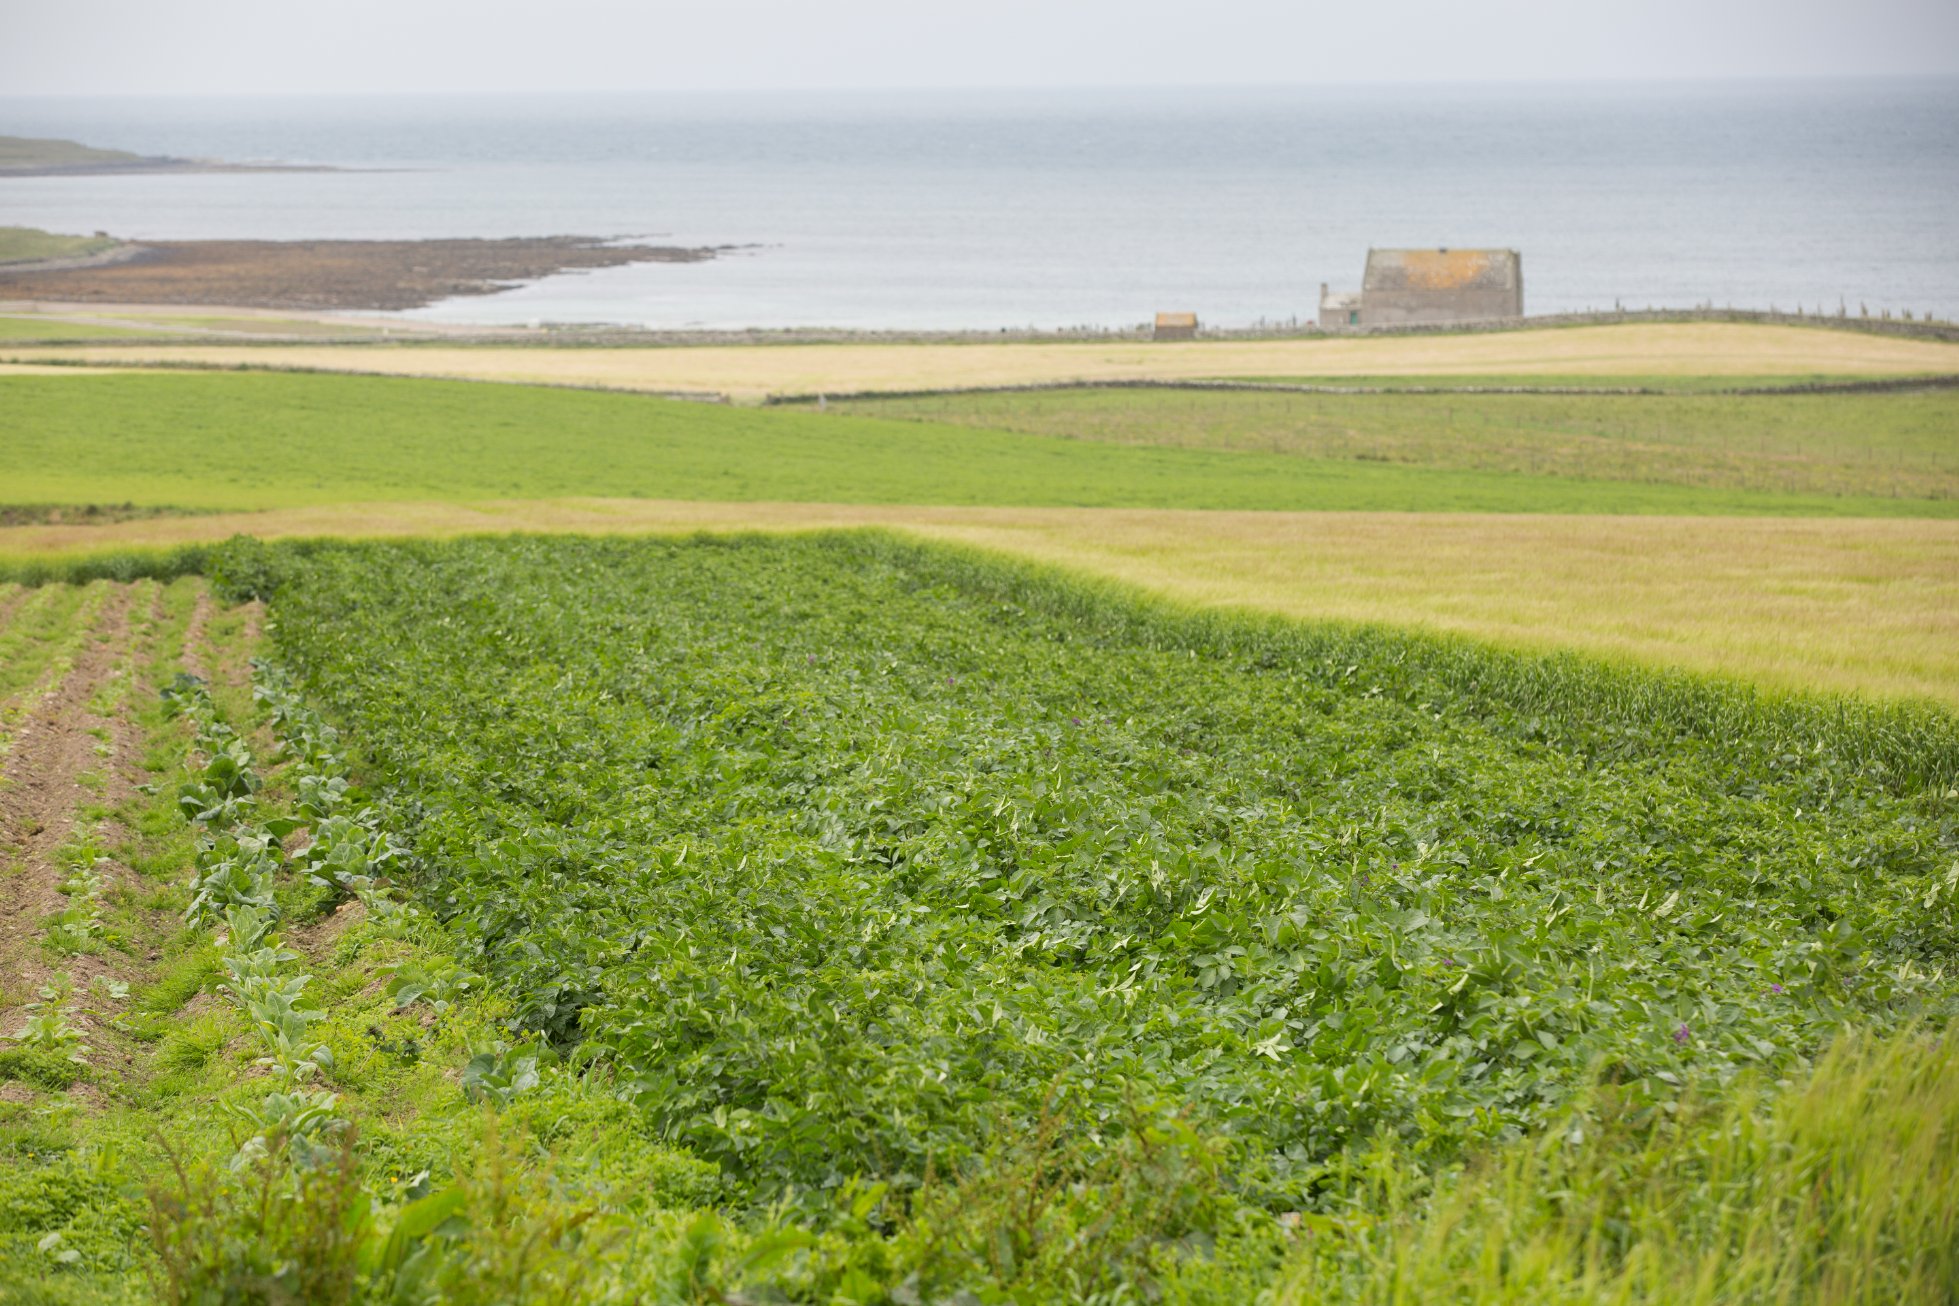 New tatties growing in Orkney's east mainland